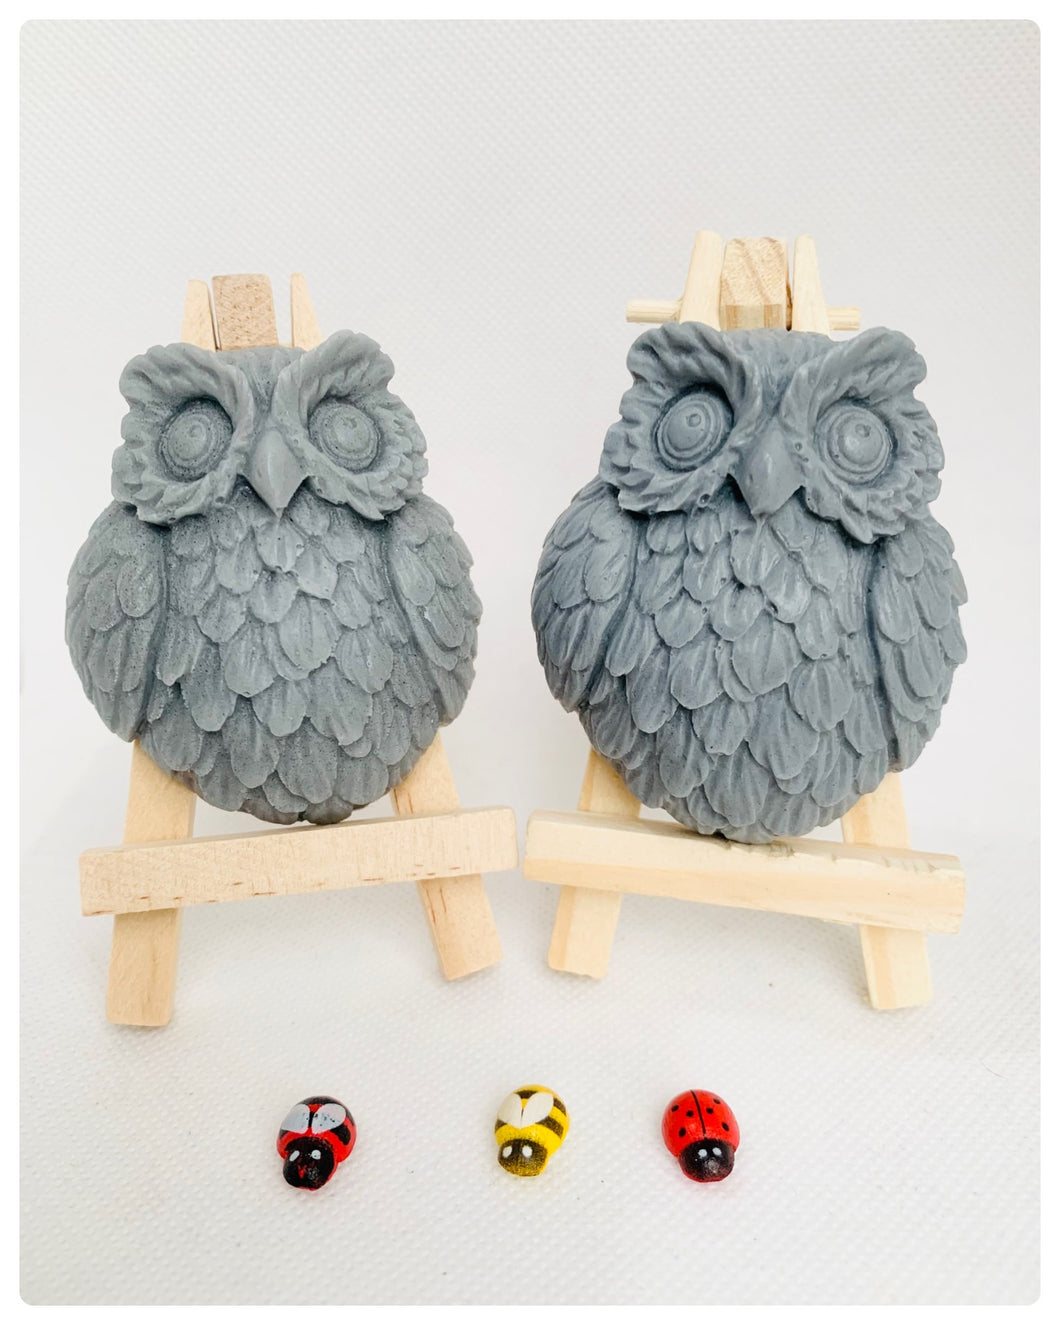 Twin Owls 120g - Set of 2 - Gift Boxed